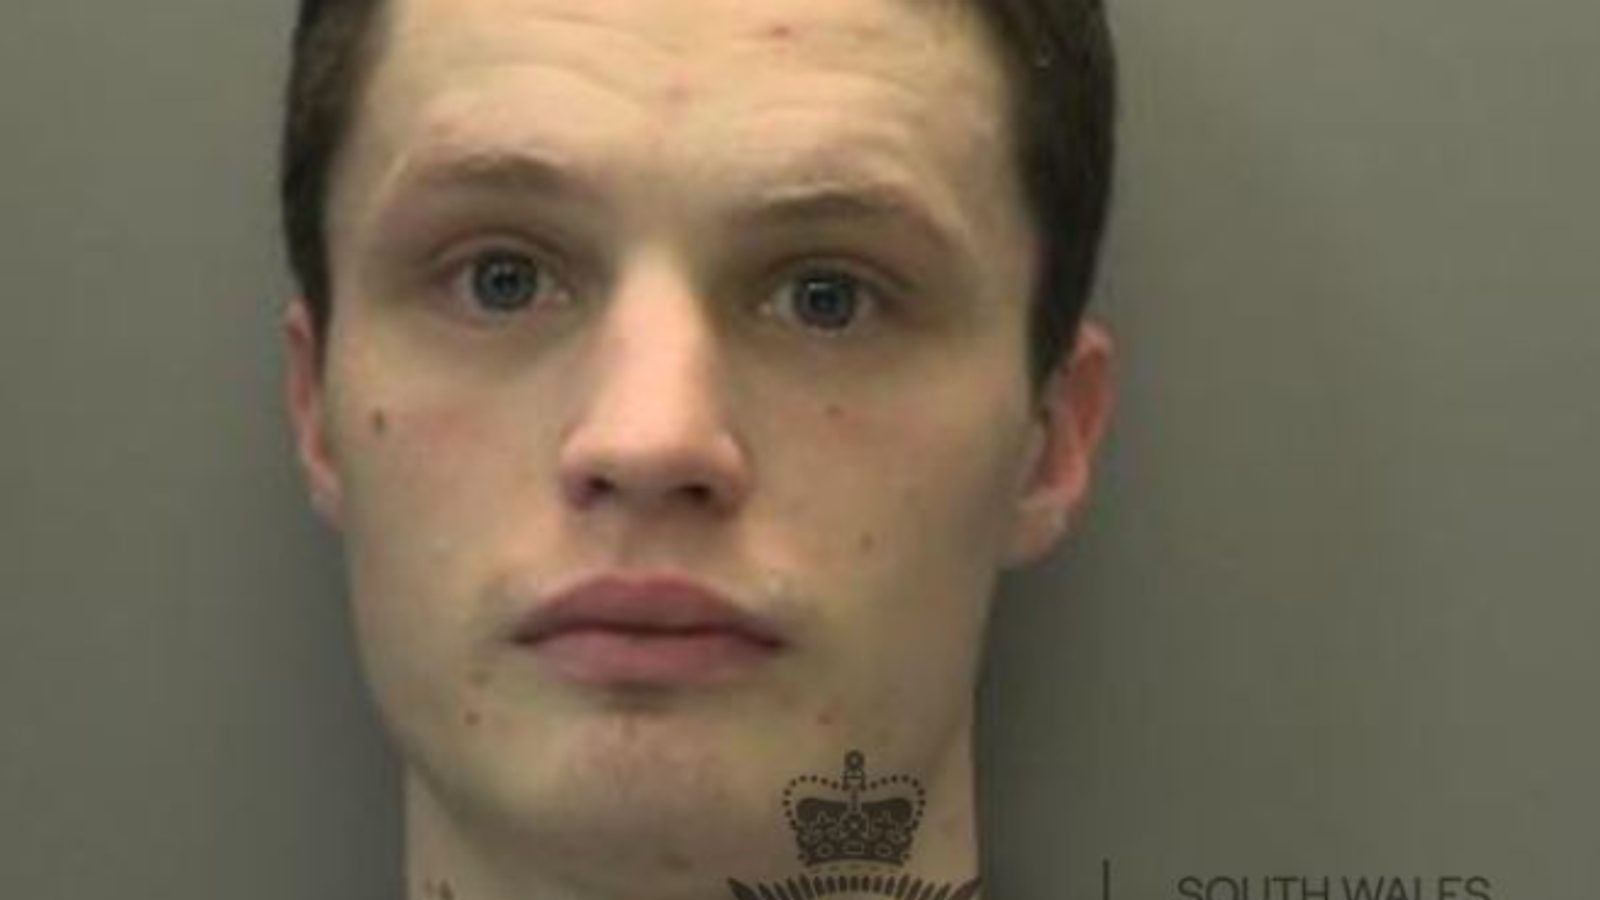 Liam Stimpson: Man jailed for raping 'homeless' woman while out celebrating birthday